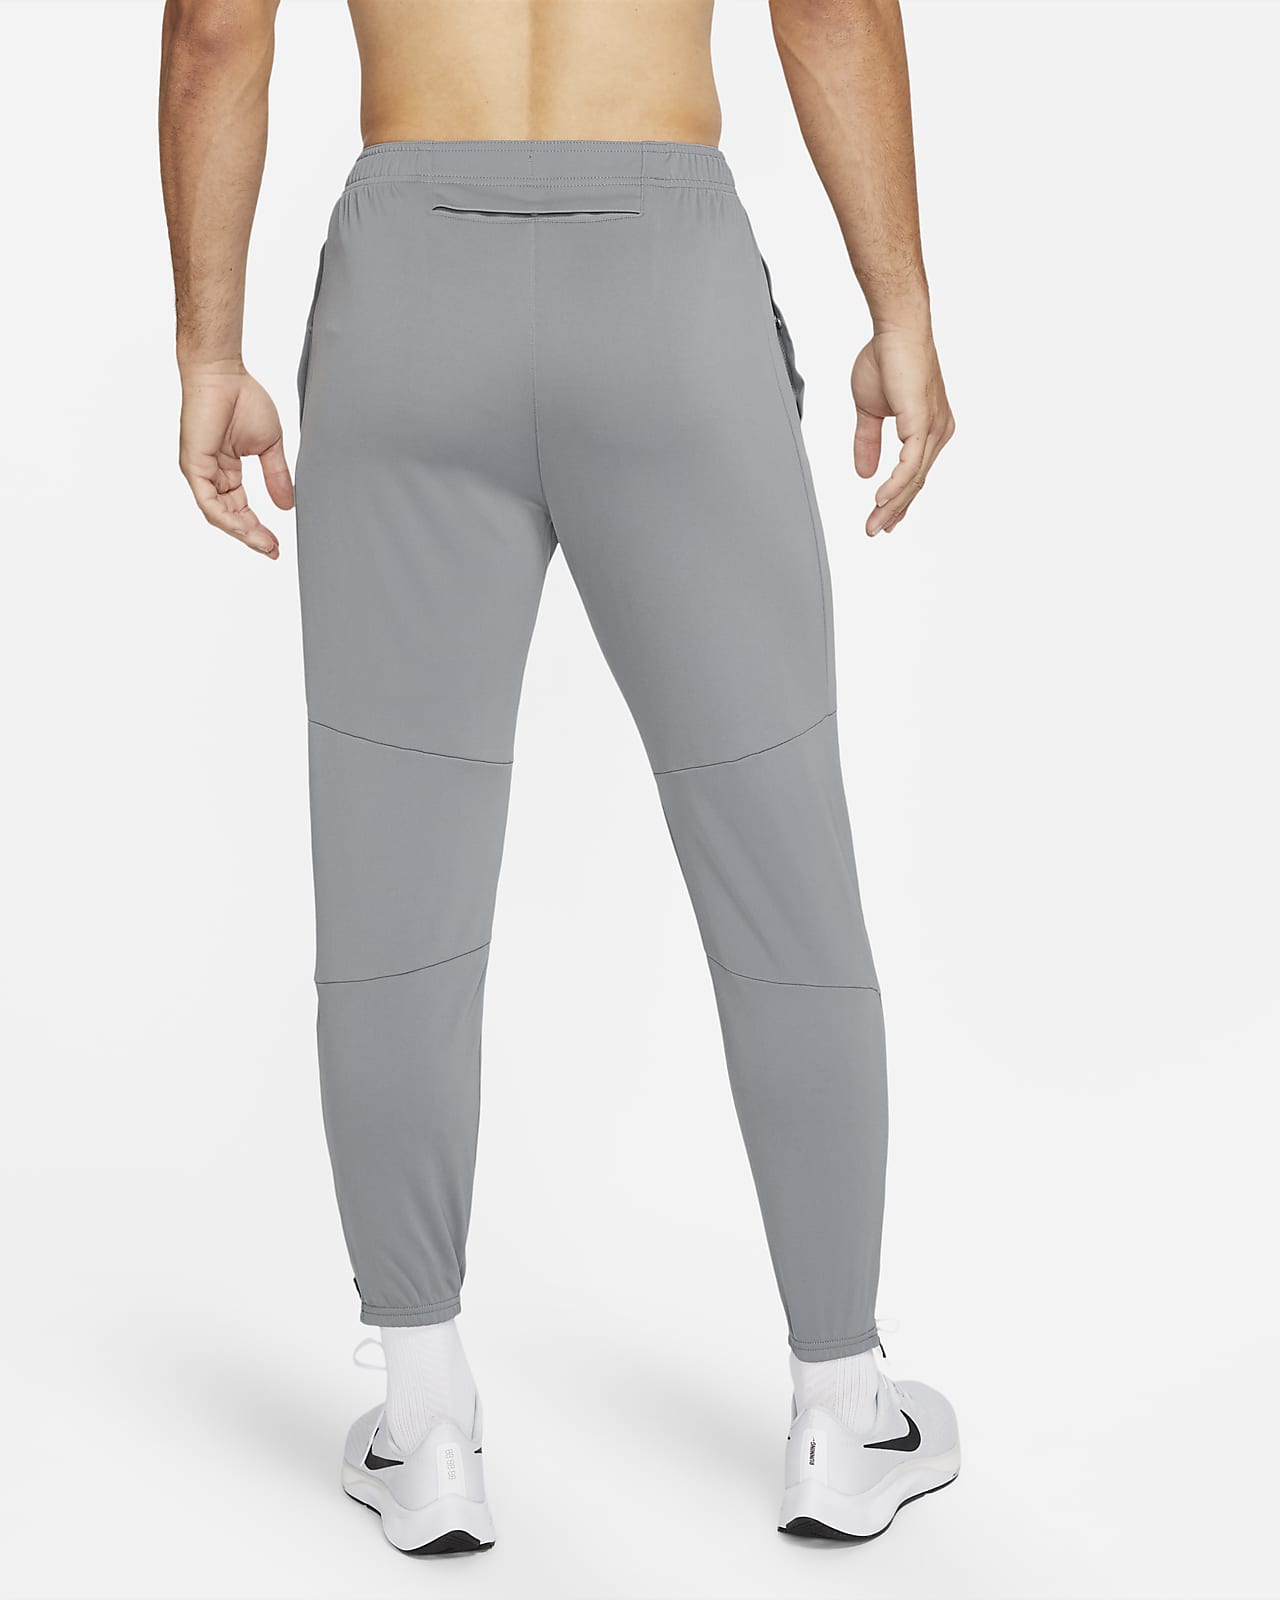 Nike Dri-FIT Challenger Men's Knit Running Trousers. Nike AT